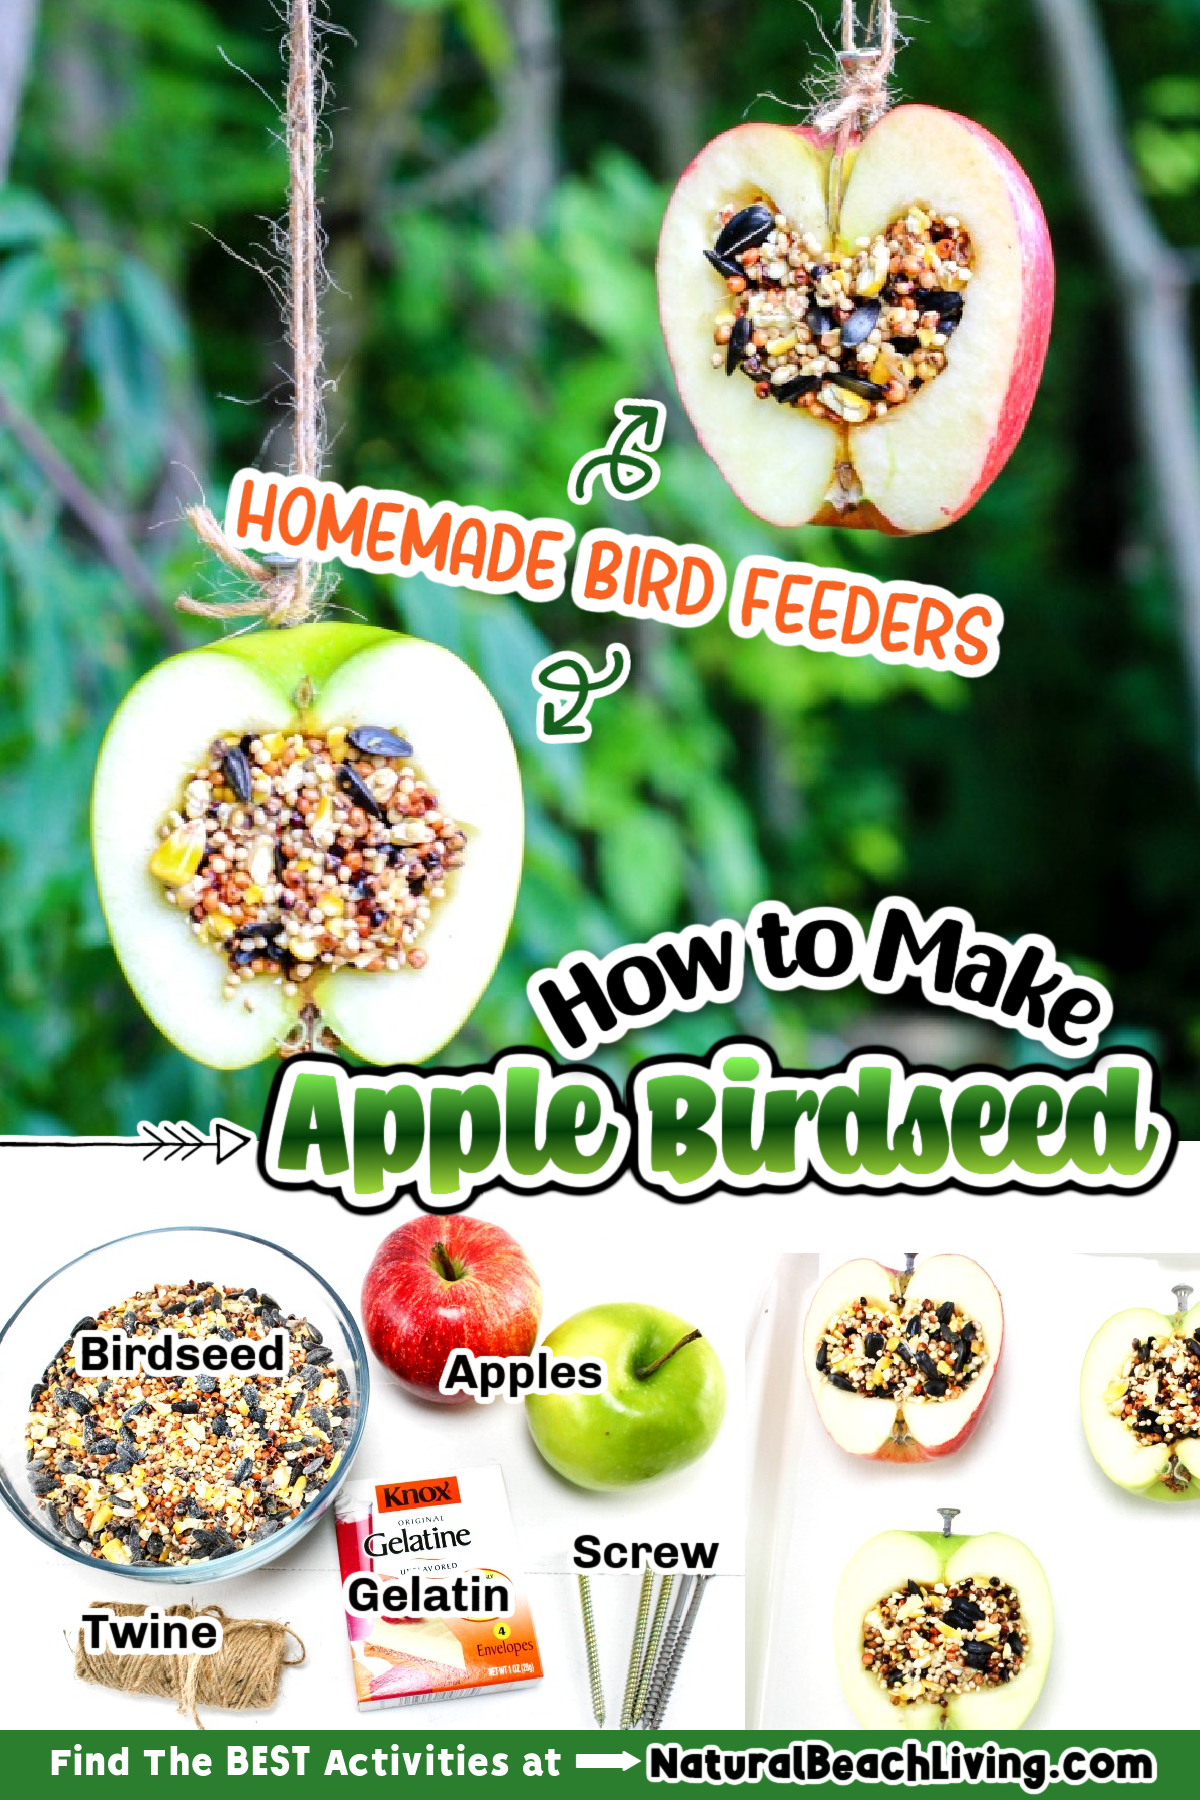 How to Make Apple Birdseed Homemade Bird Feeders, Apple Bird Feeders, These APPLE BIRDSEED BIRD FEEDERS ARE THE BEST! Your backyard birds will flock to your yard with these Easy bird feeders. DIY bird feeders are a great family craft and a fun way to learn about nature. Adding in apples for fall is an extra special homemade bird treat, Homemade Bird Treats, From How to Make bird seed ornaments to DIY birdseed ornaments and Apple Activities for Kids, we have hundreds of fall ideas and activities